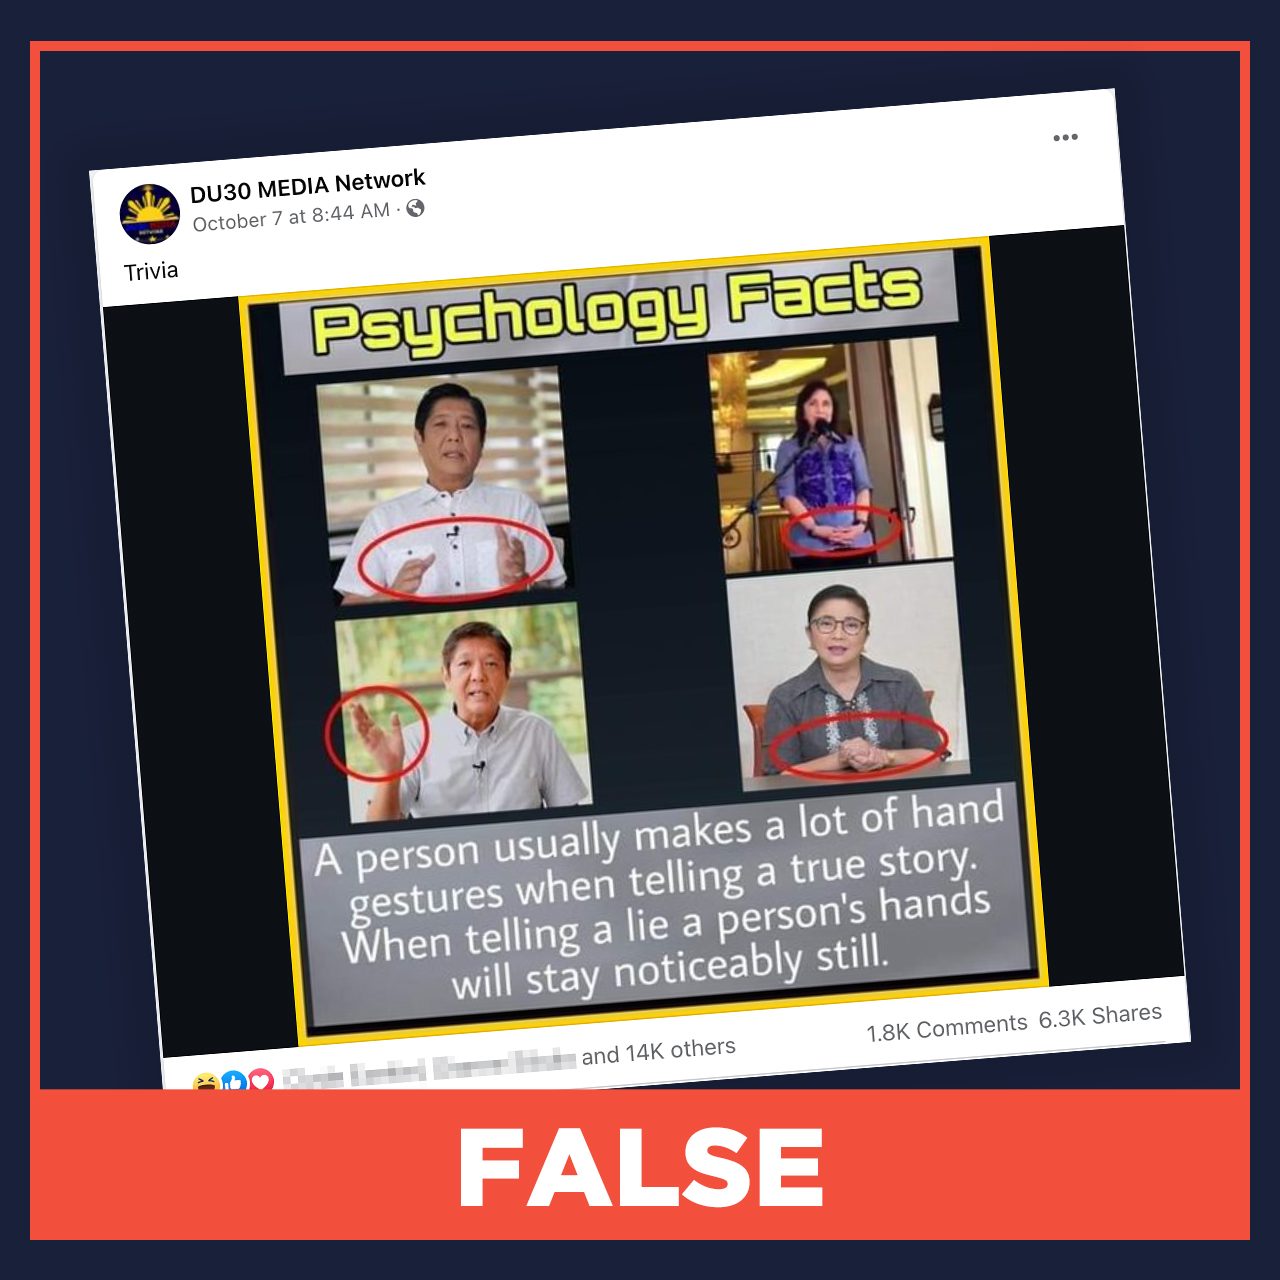 FALSE: You can tell if someone is lying through hand gestures alone